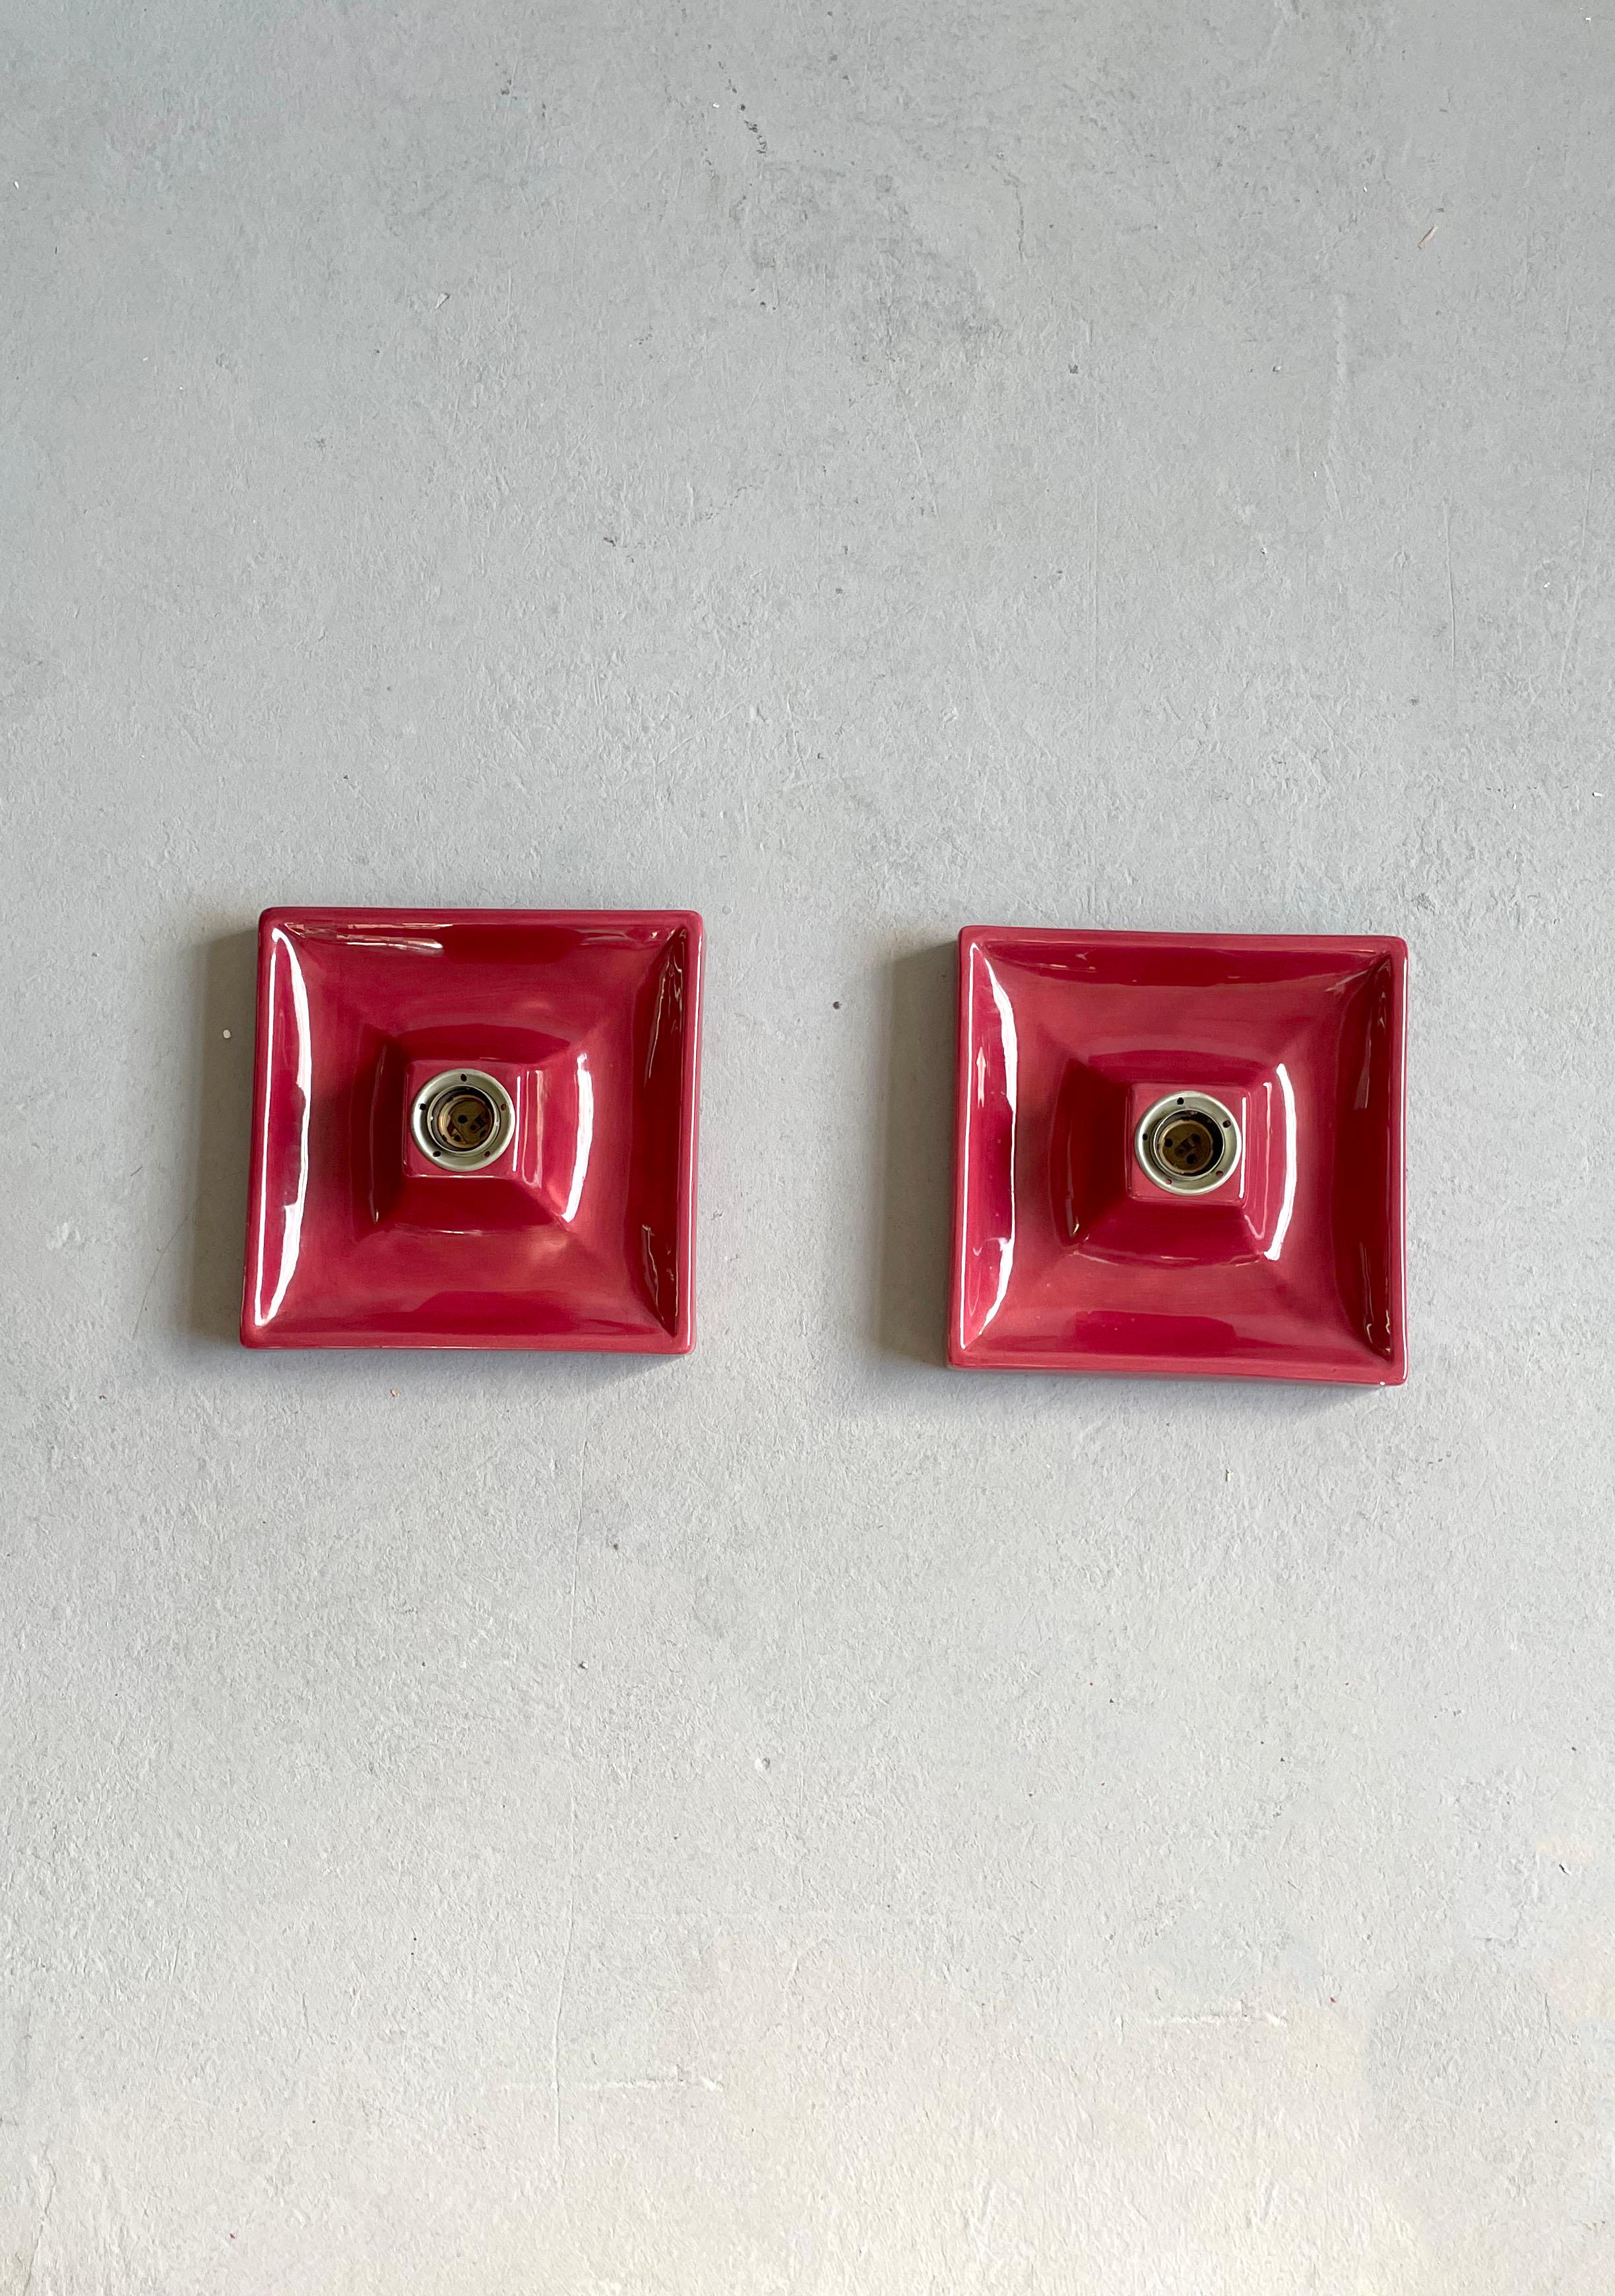 Set of 2 Ceramic Space Age Hustadt Leuchten Wall Lamps, Sconces, Germany 1960s For Sale 5